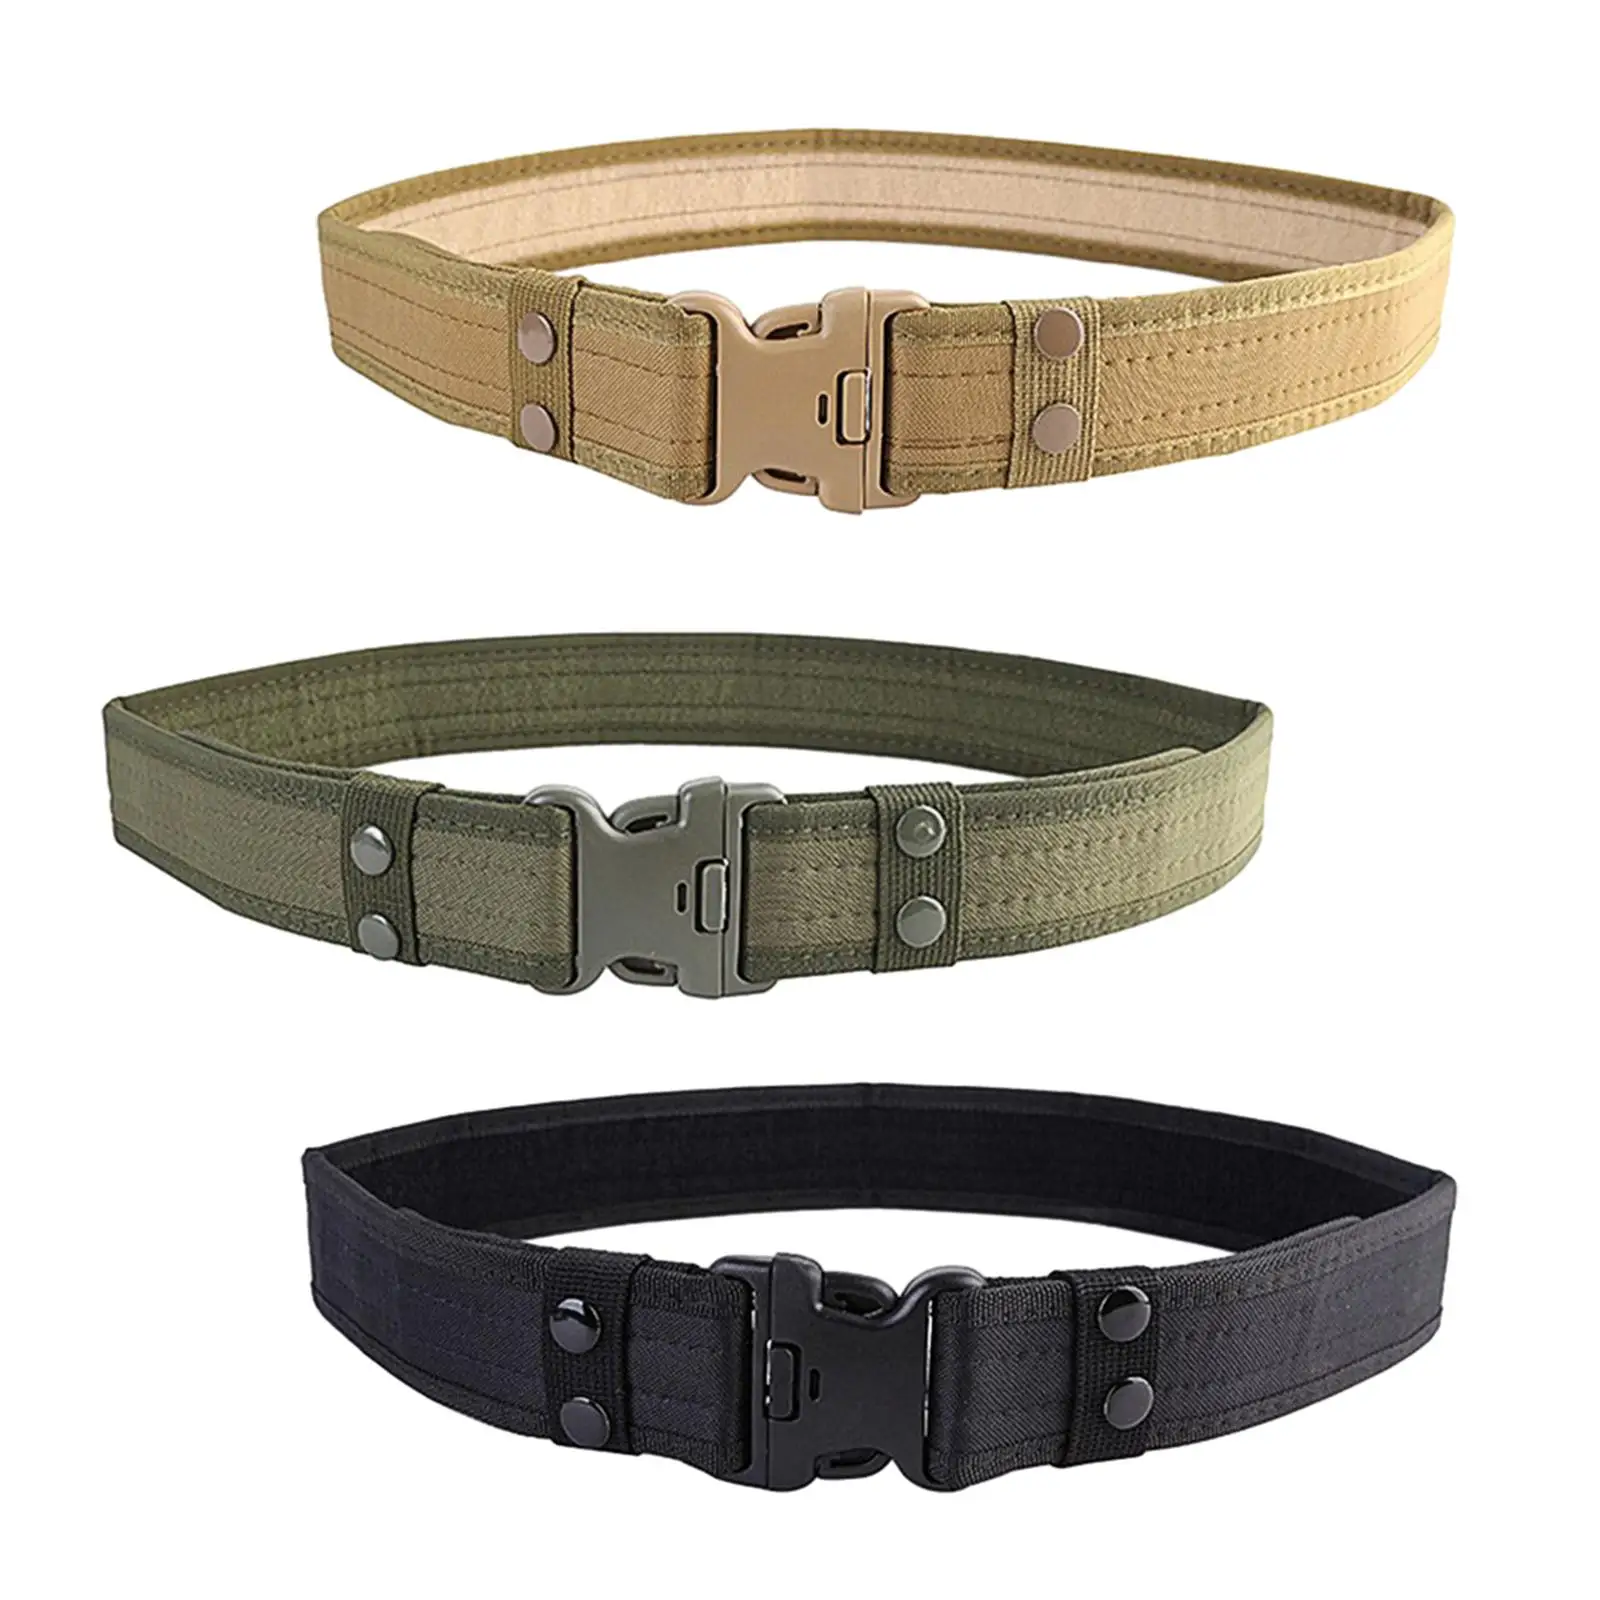 Men Belts with Quick Release Buckle Clothing Accessories Outer Belt Waistband for Leisure Sports Hunting Training Hiking Camping